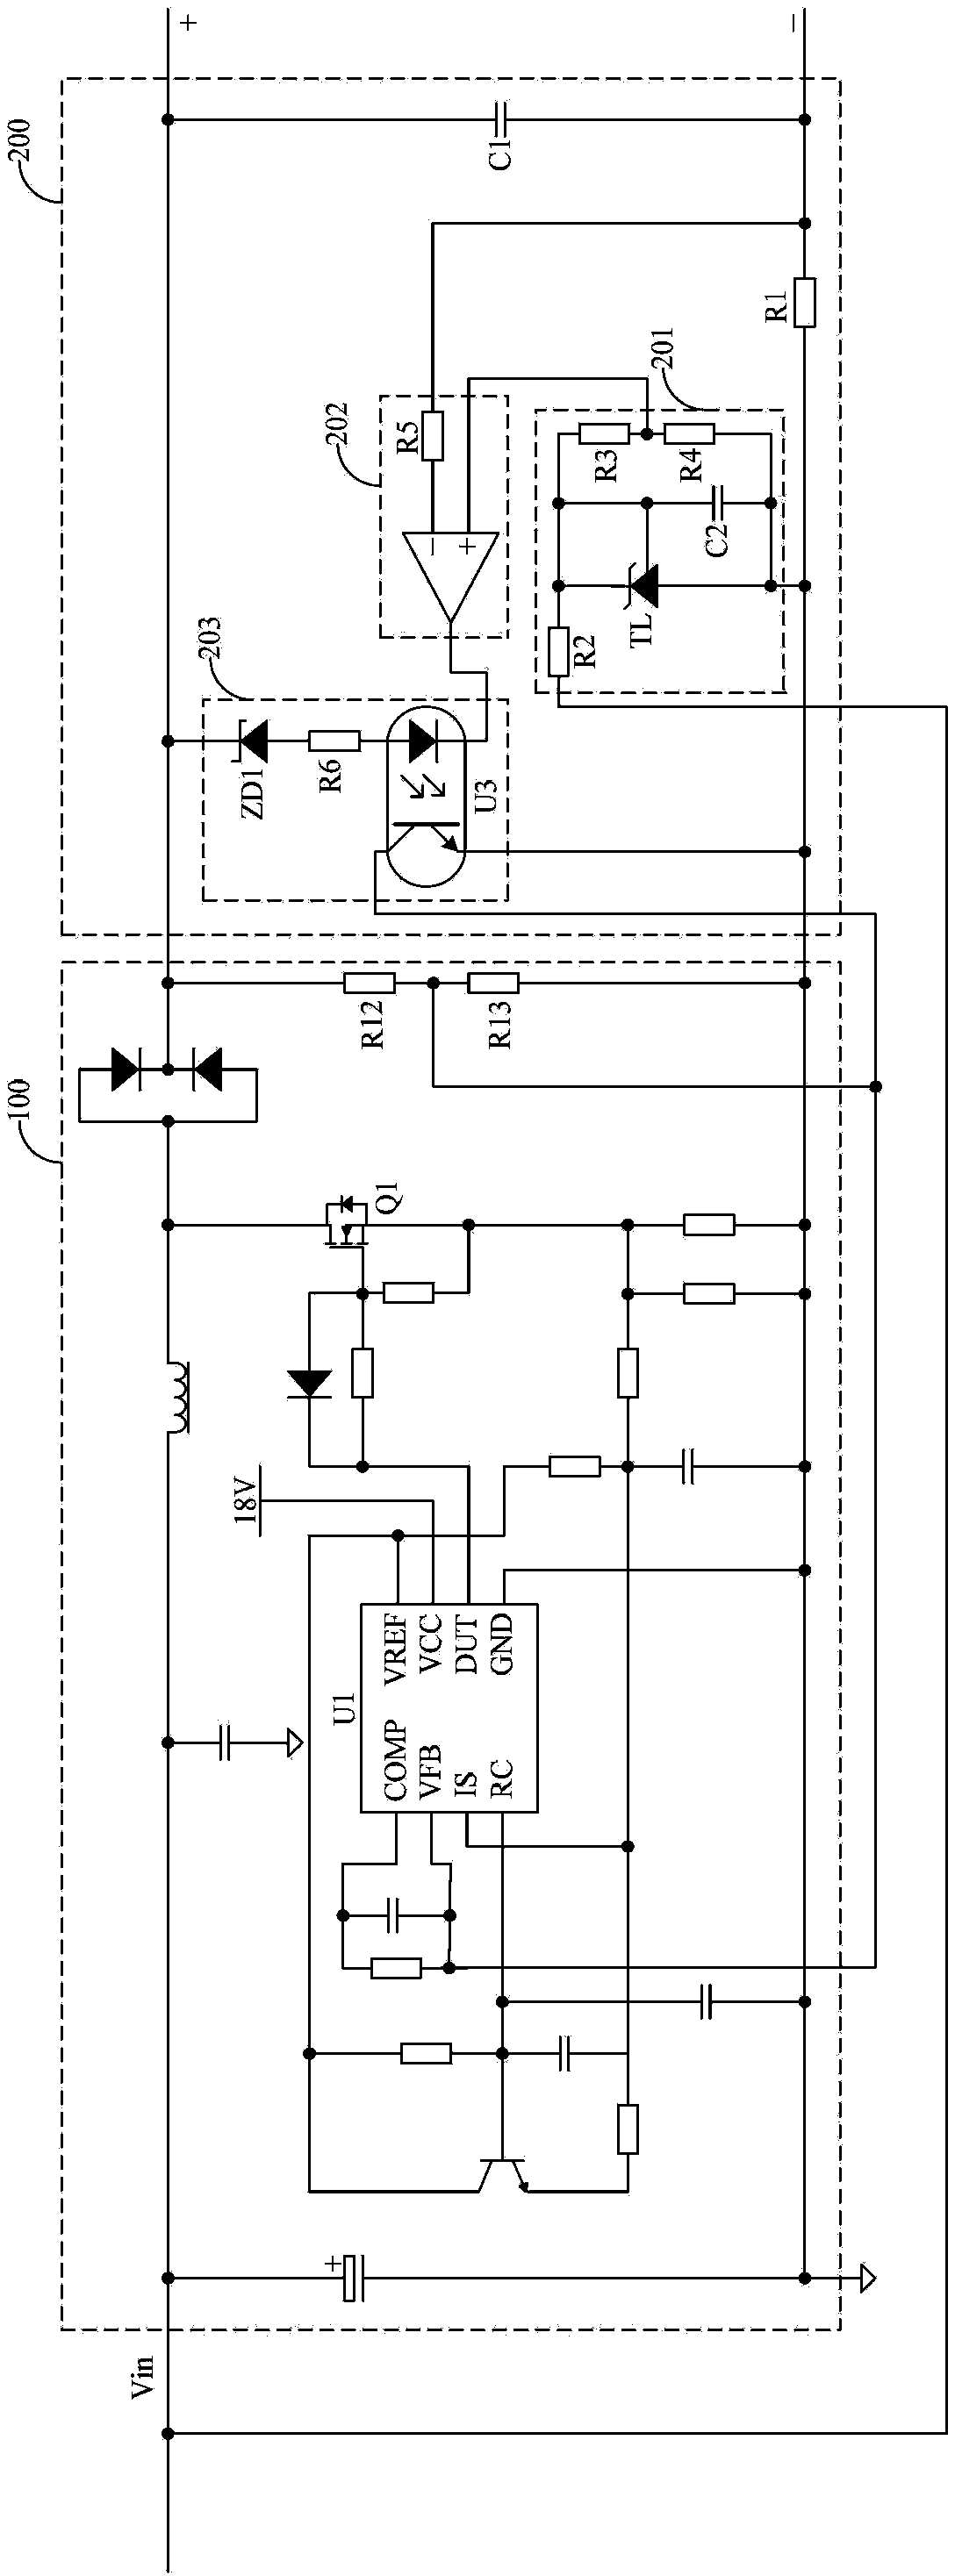 Charger and over-current protection circuit thereof